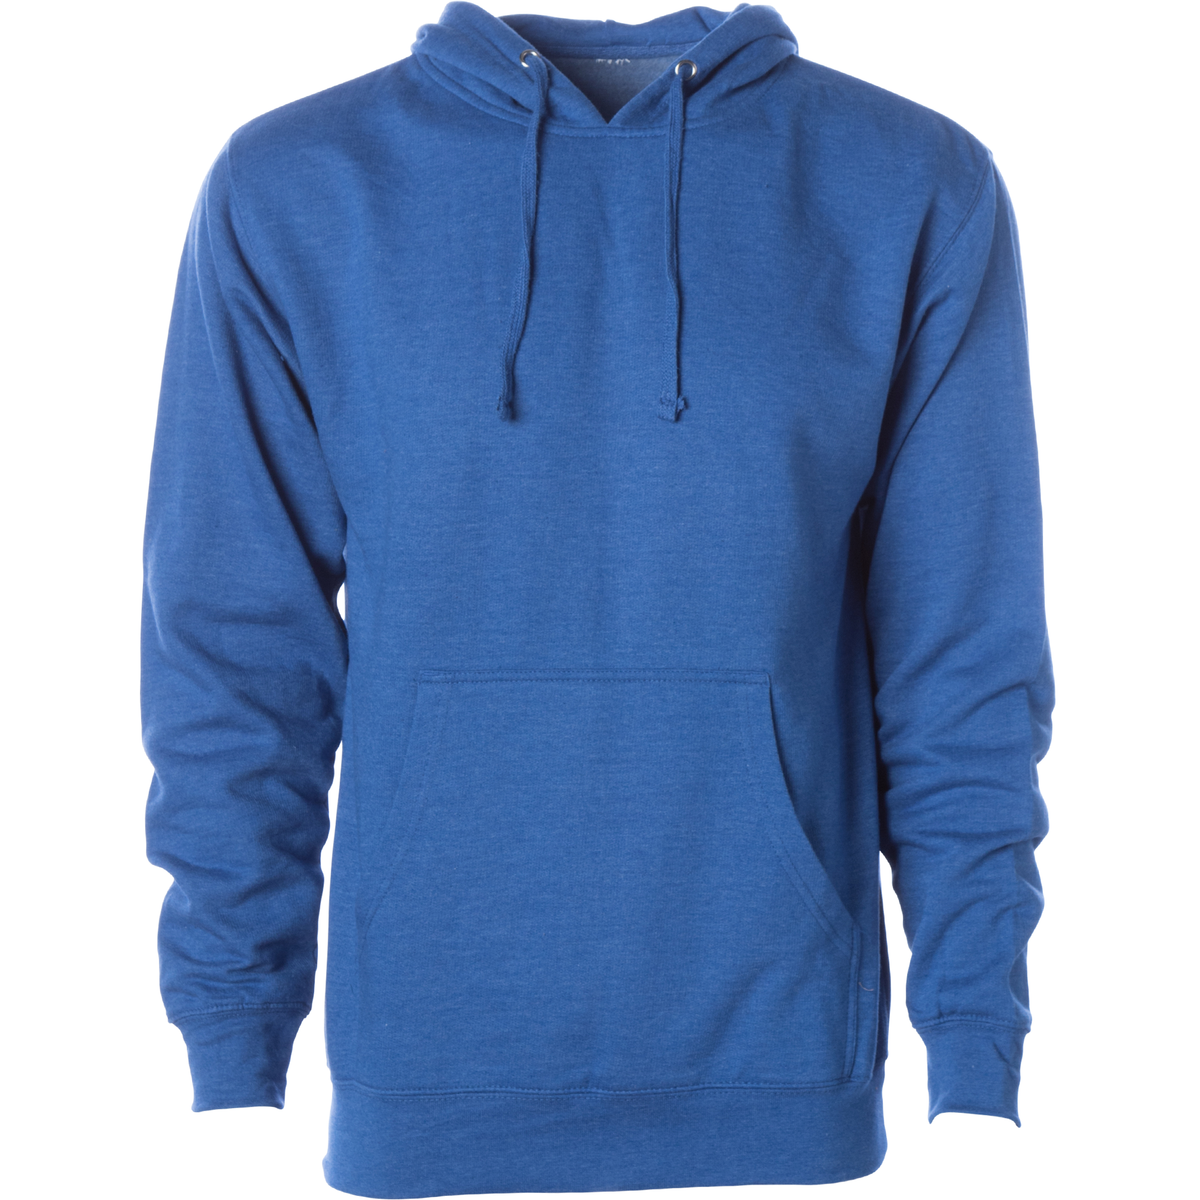 SS4500 #5 - Midweight Hooded Pullover Sweatshirt